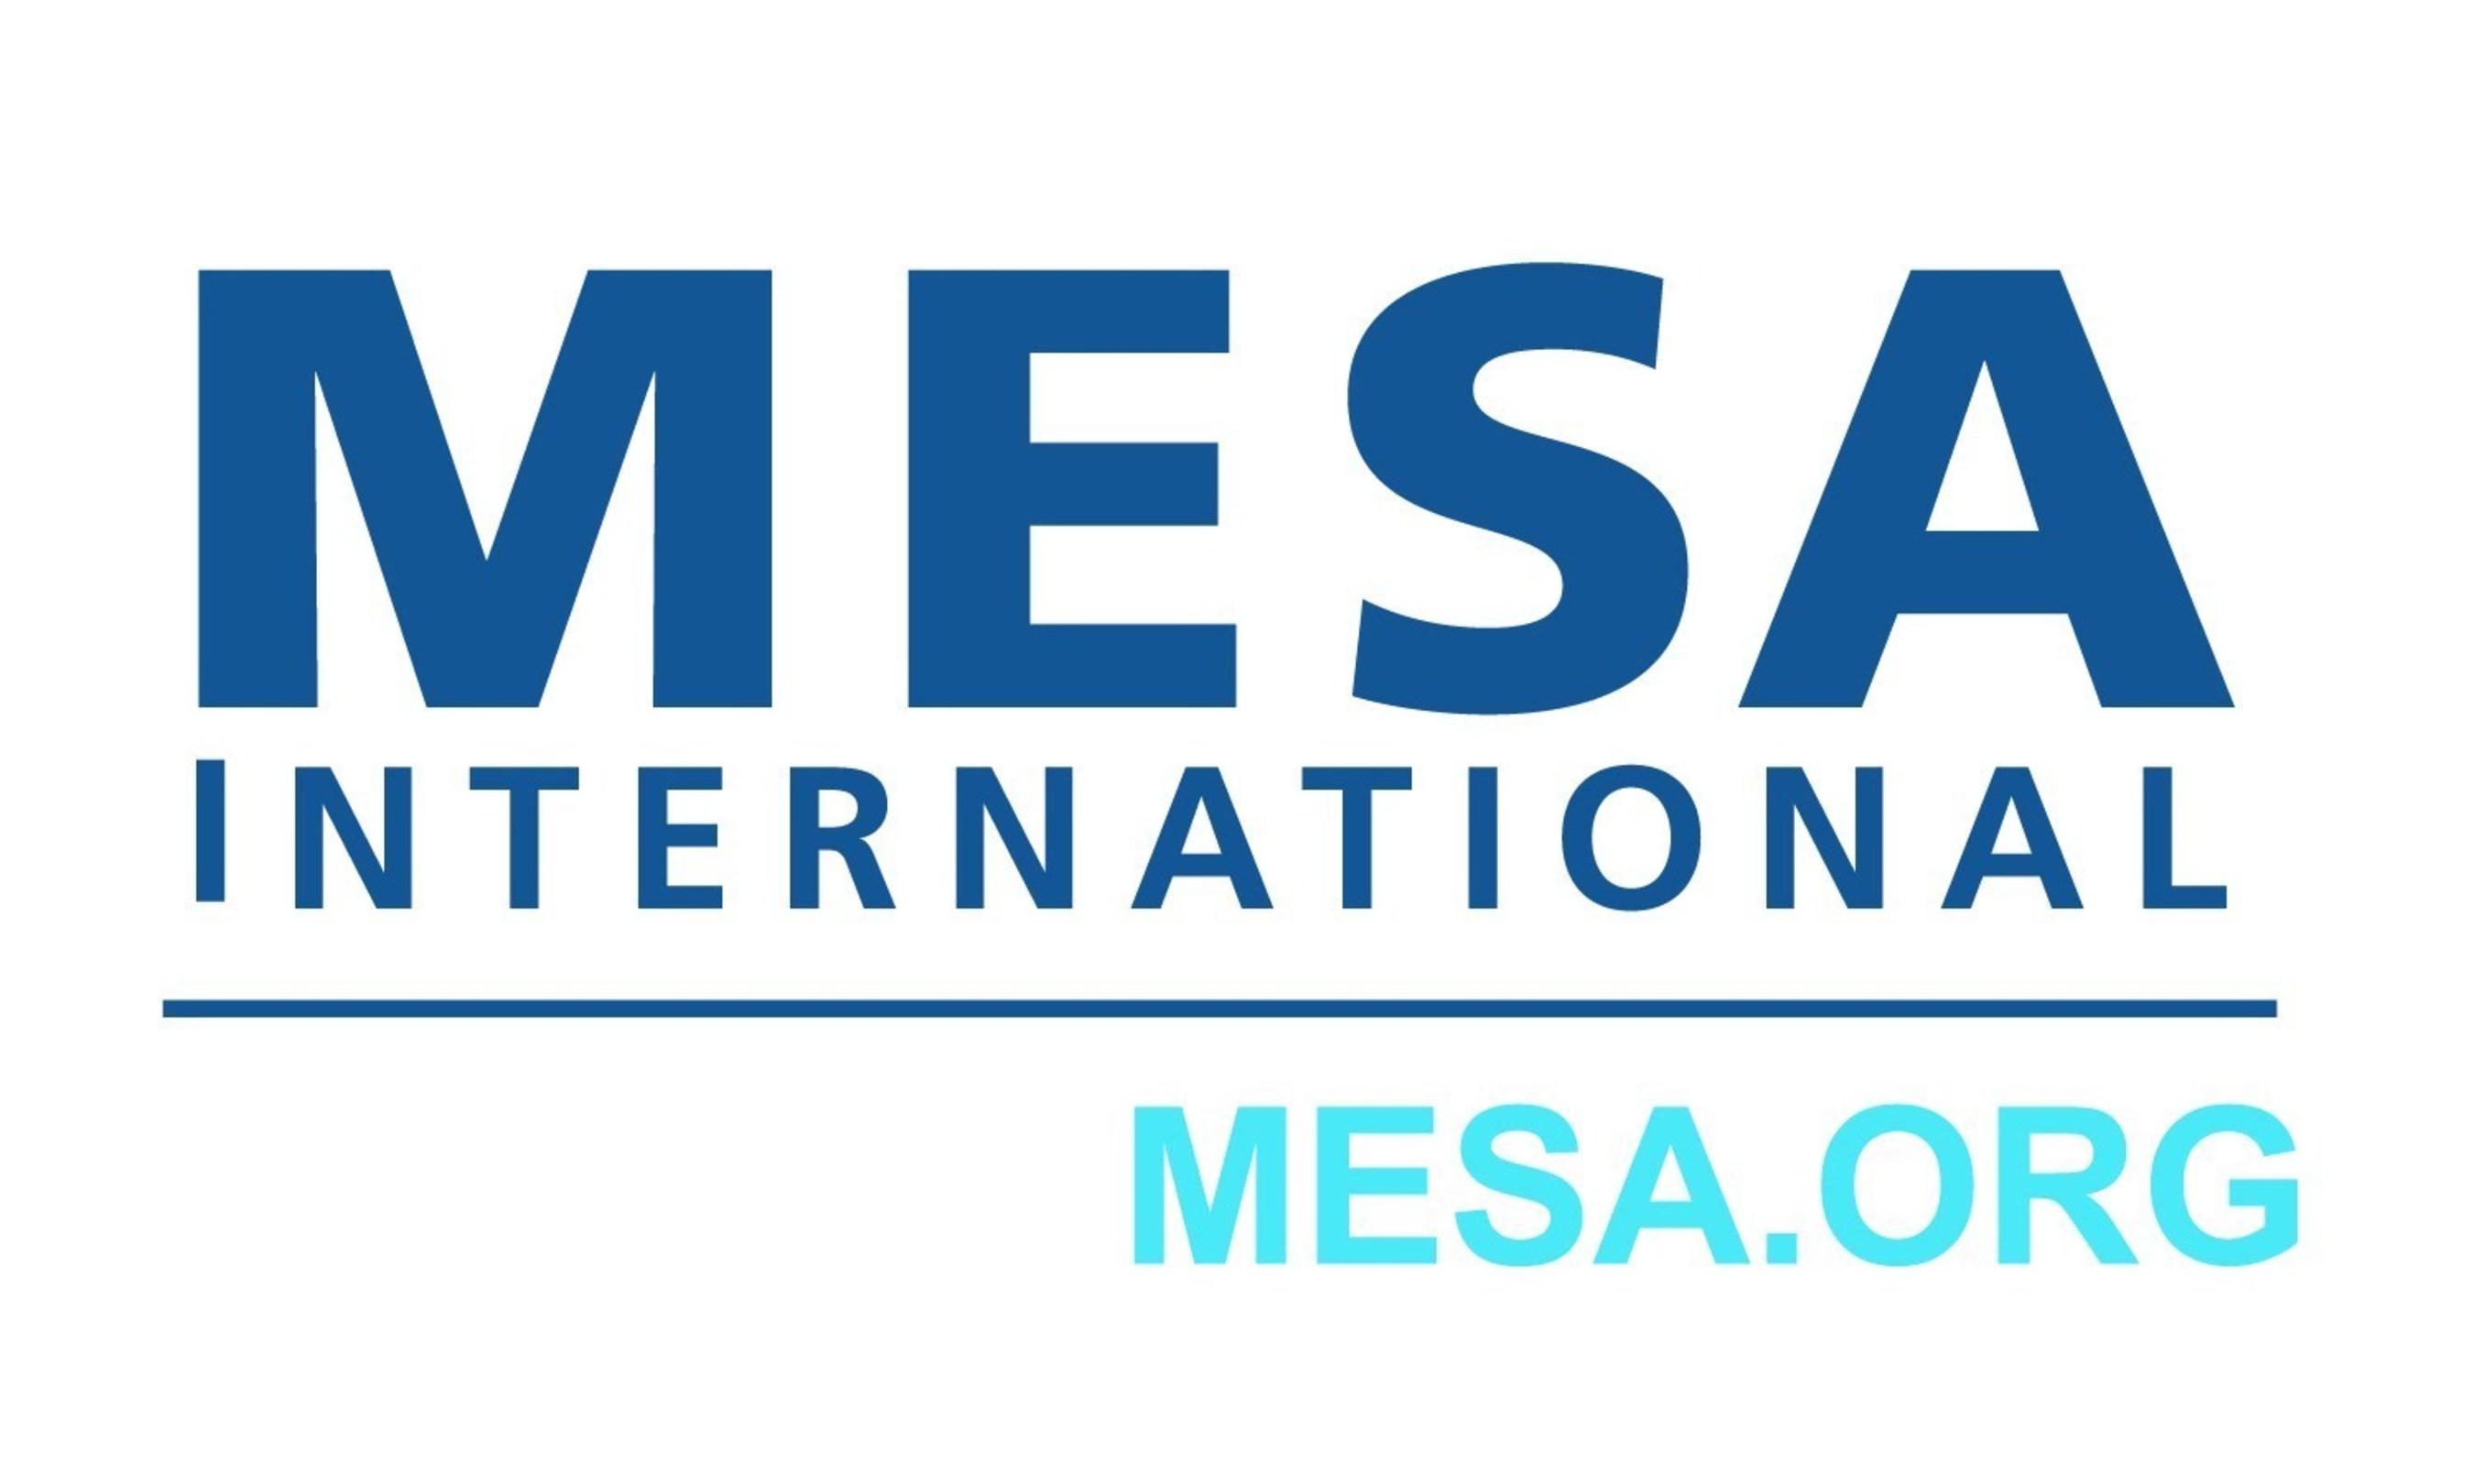 MESA (Manufacturing Enterprise Solutions Association) International is a global, not-for-profit community of manufacturers, producers, industry leaders and solution providers who are focused on improving Operations Management capabilities through the effective application of Information Technologies, IT-based solutions and best practices. For more information about MESA, visit www.mesa.org.